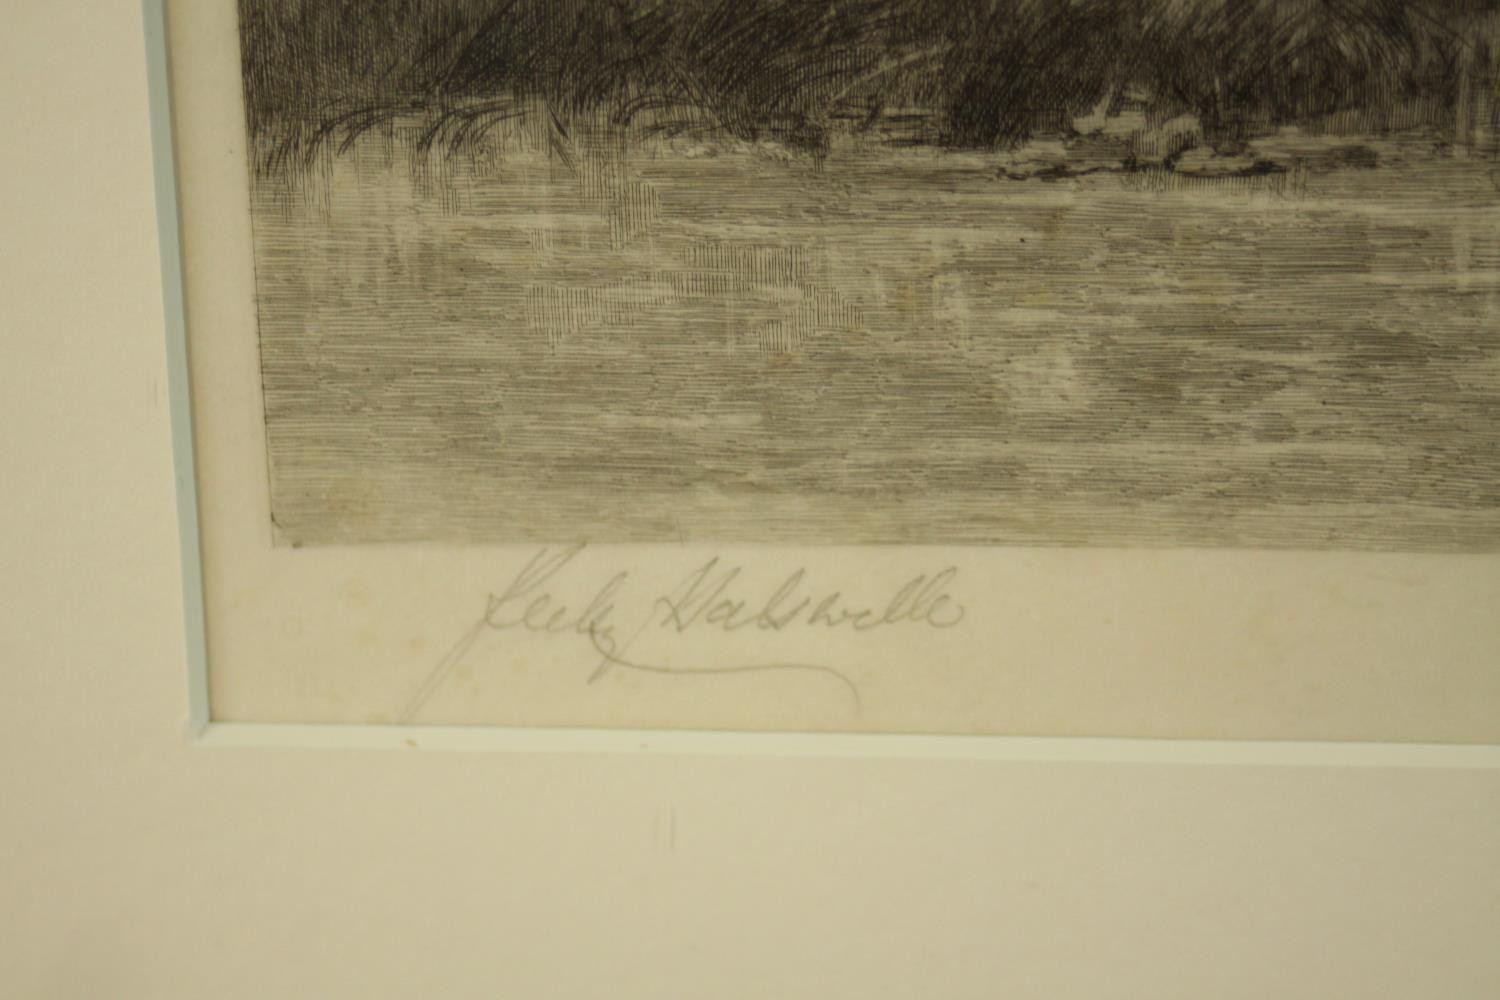 Keeley Halswelle (1831-1891, English), Kilchurn Castle, Loch Awe, pencil signed etching on paper, - Image 5 of 7